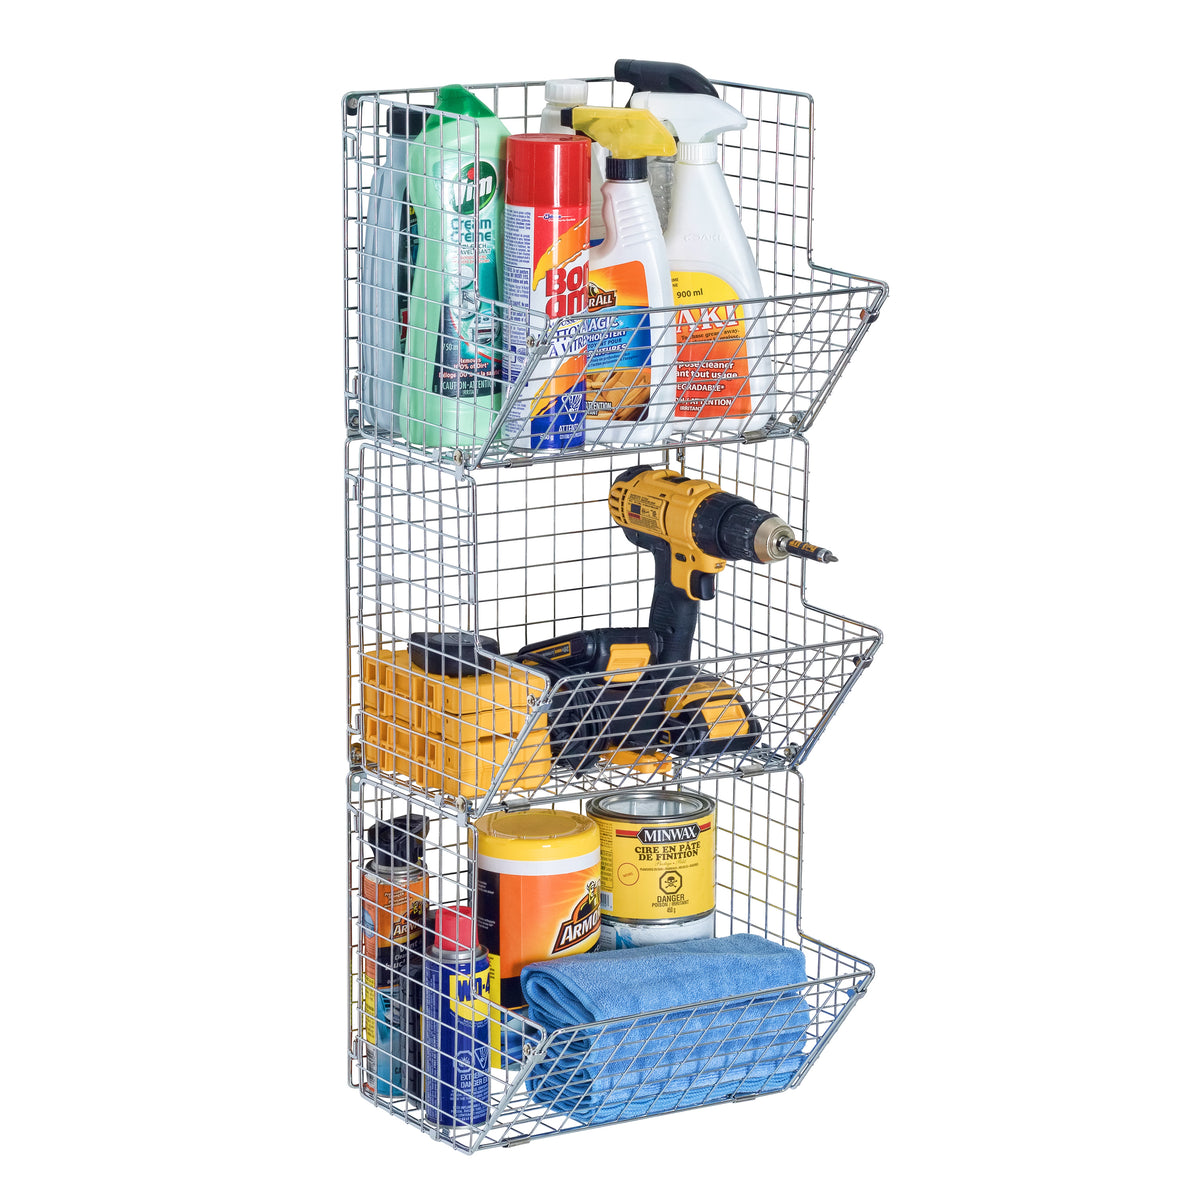 Premium 3-Tier Wall Mounted Hanging Wire Baskets that displays cleaning materials and hand tools in a vertical arrangement